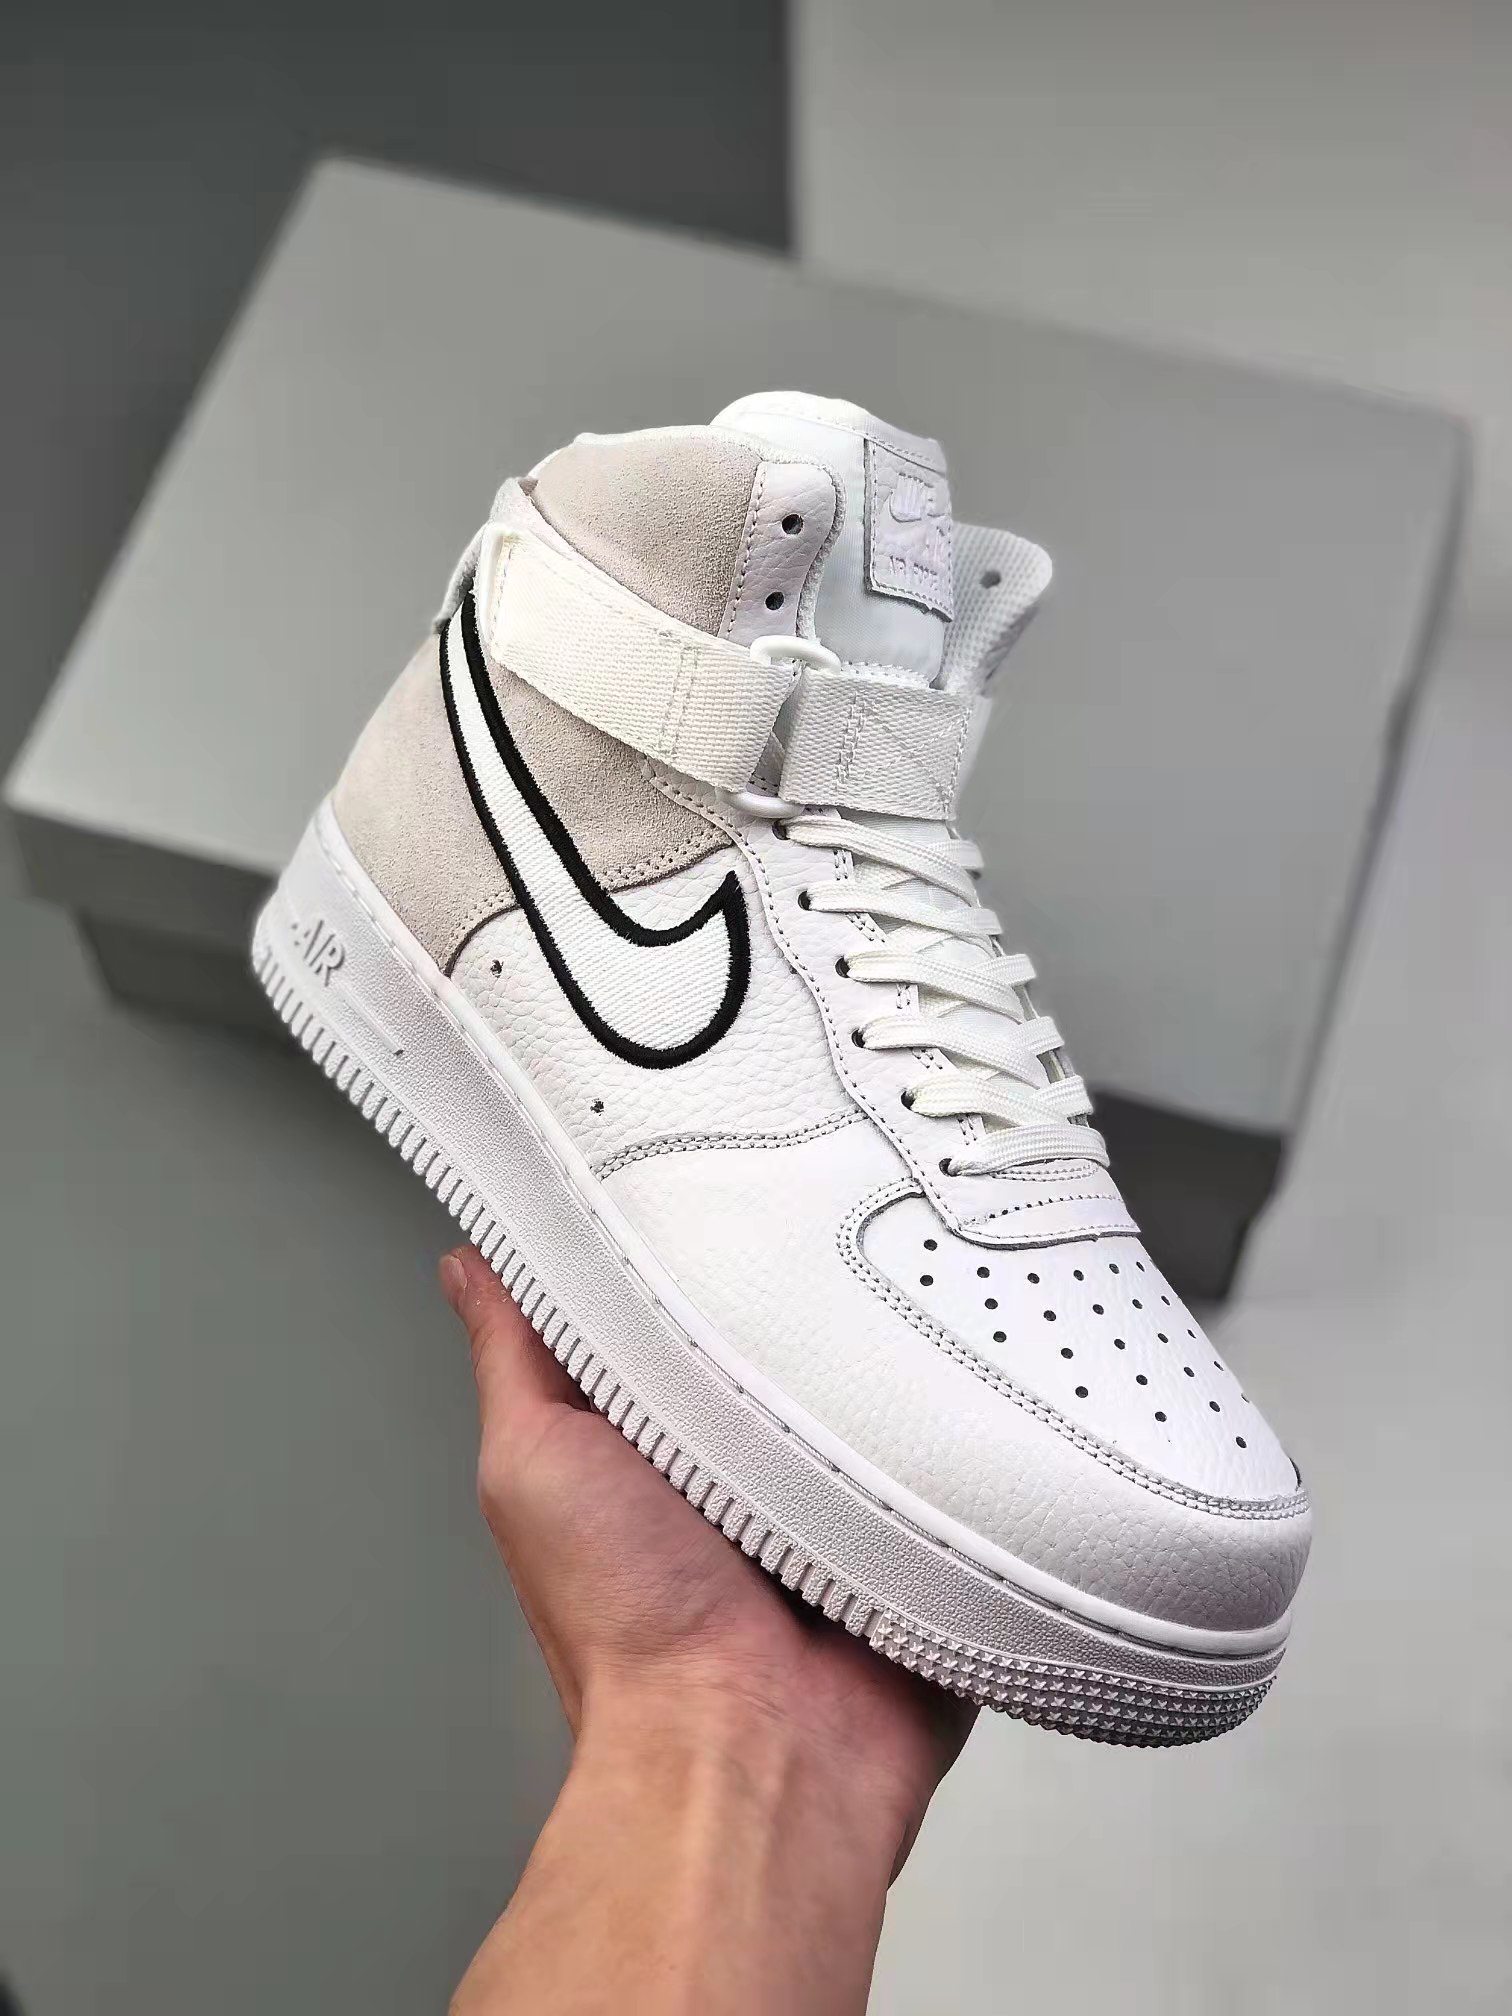 Nike Air Force 1 High White Vast Grey Black - AO2442-100 available now